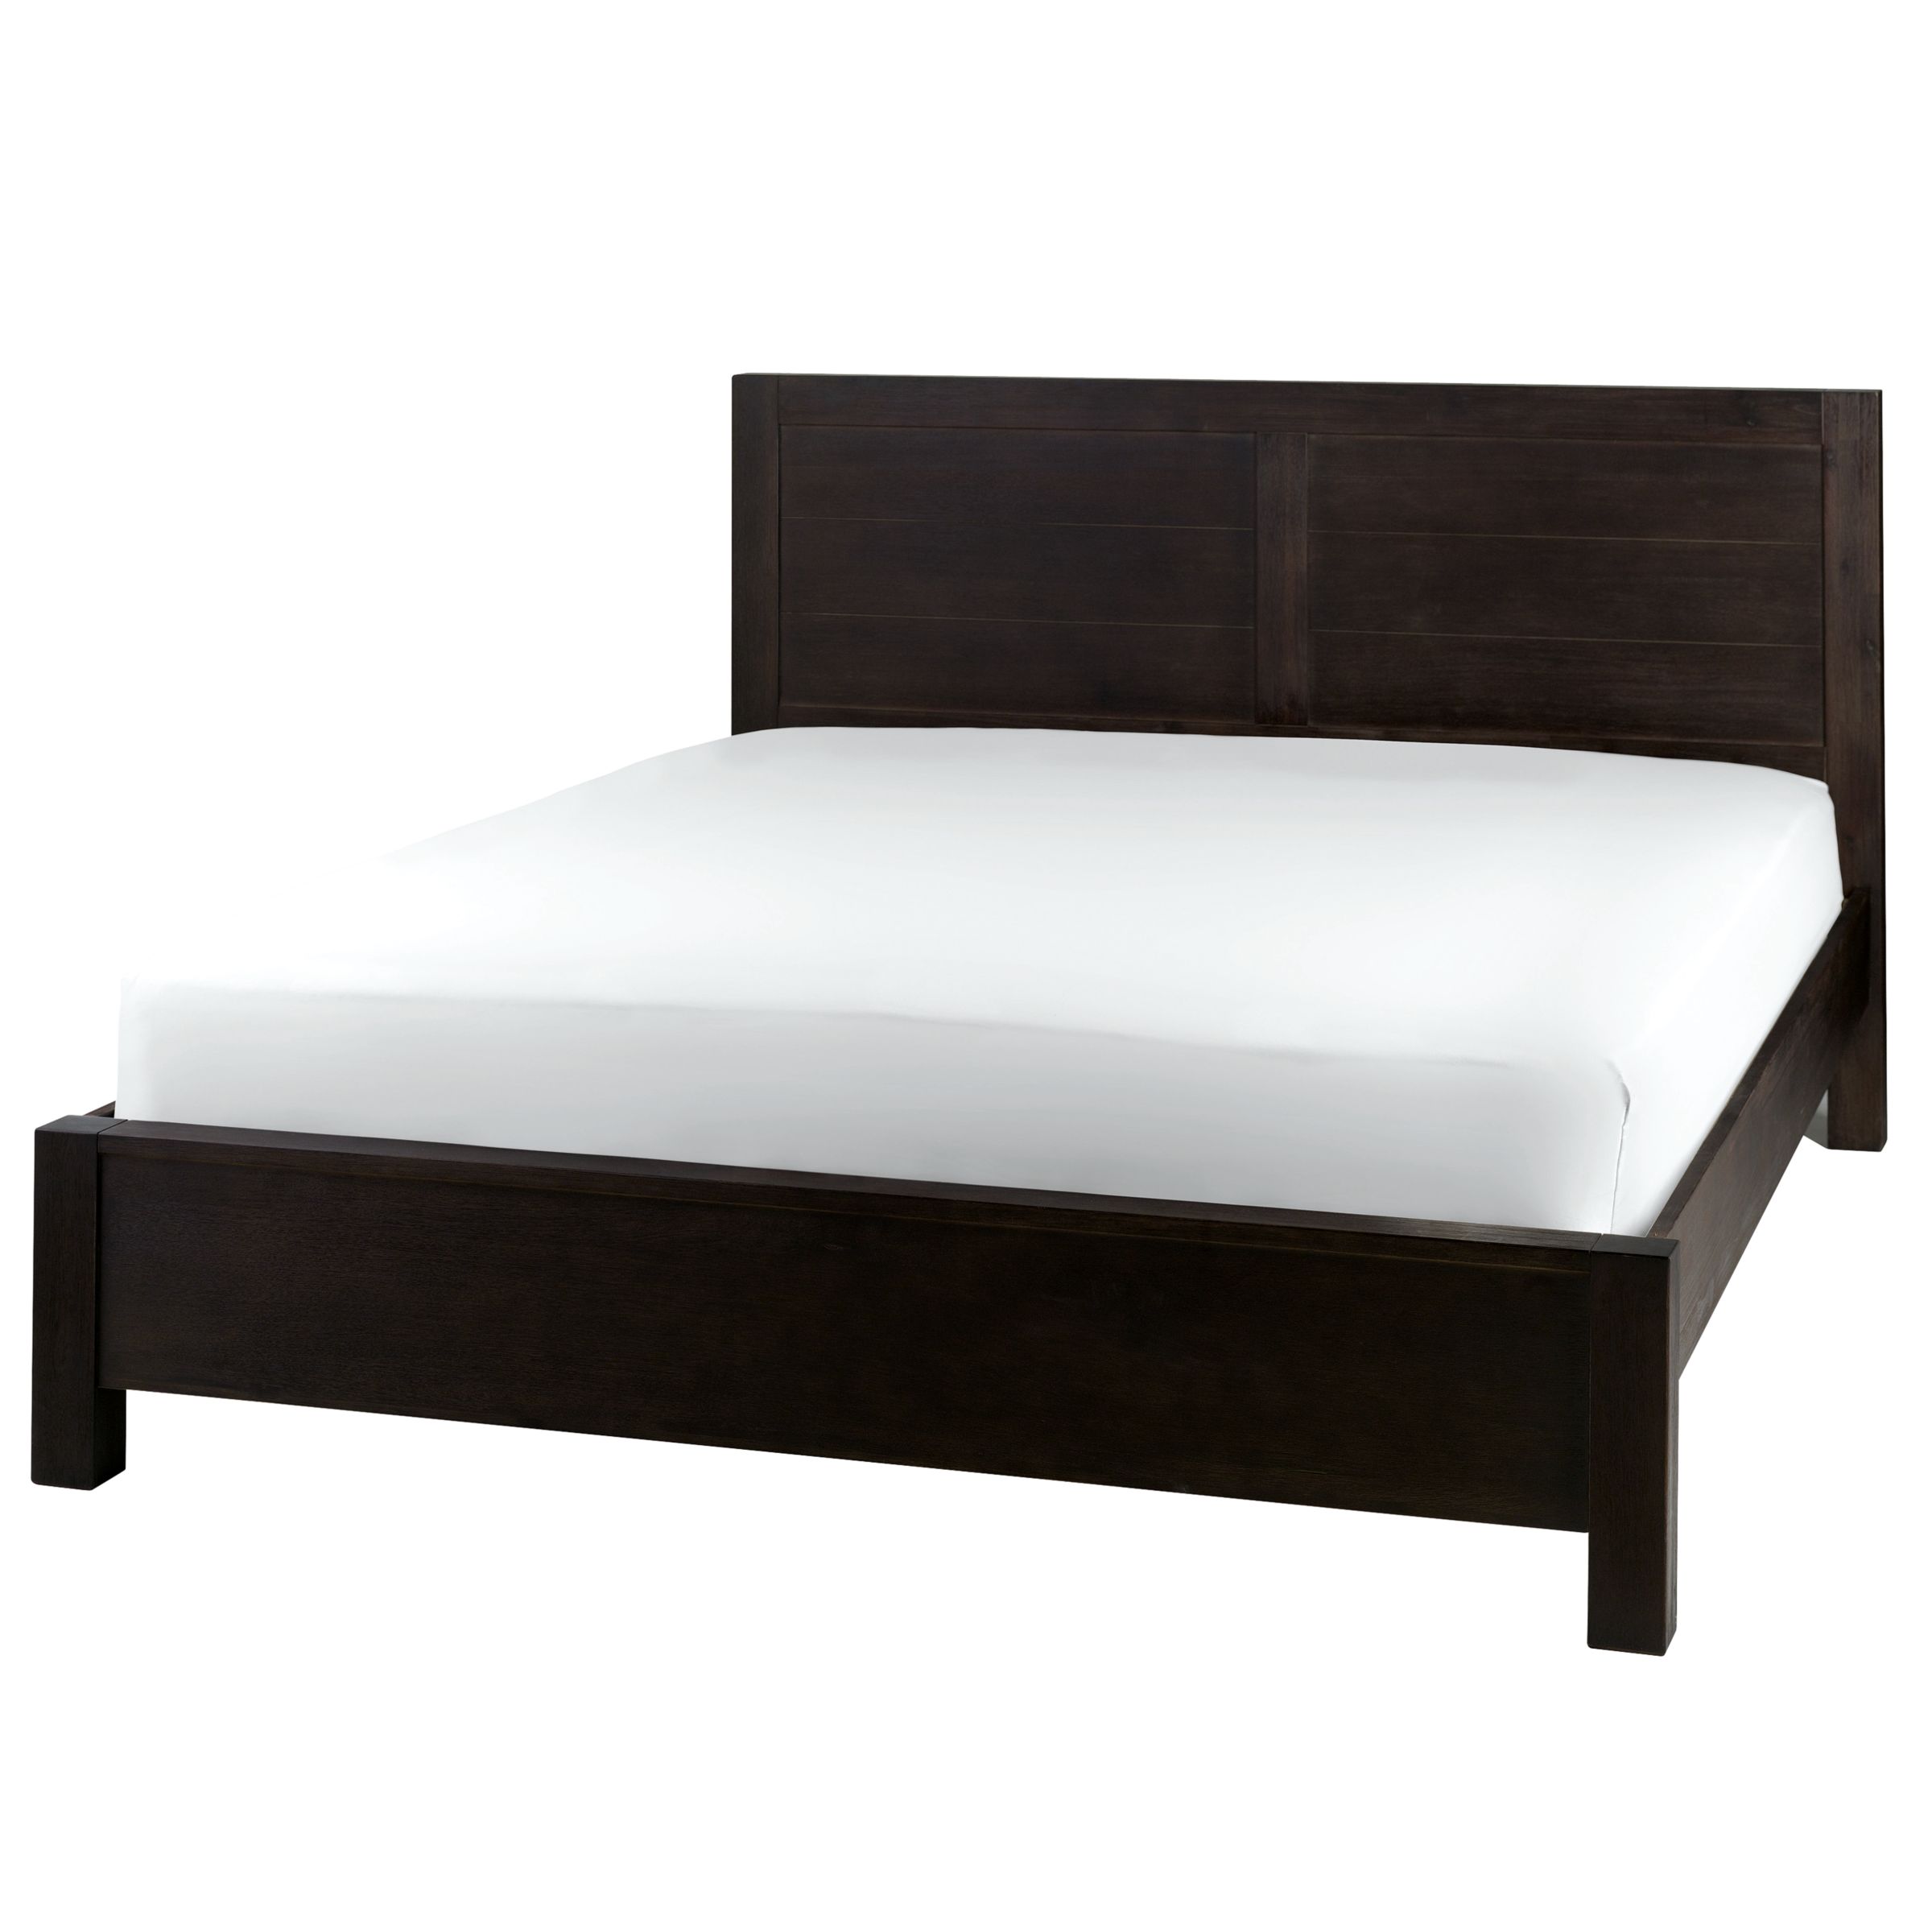 Stamford Bedstead, Double